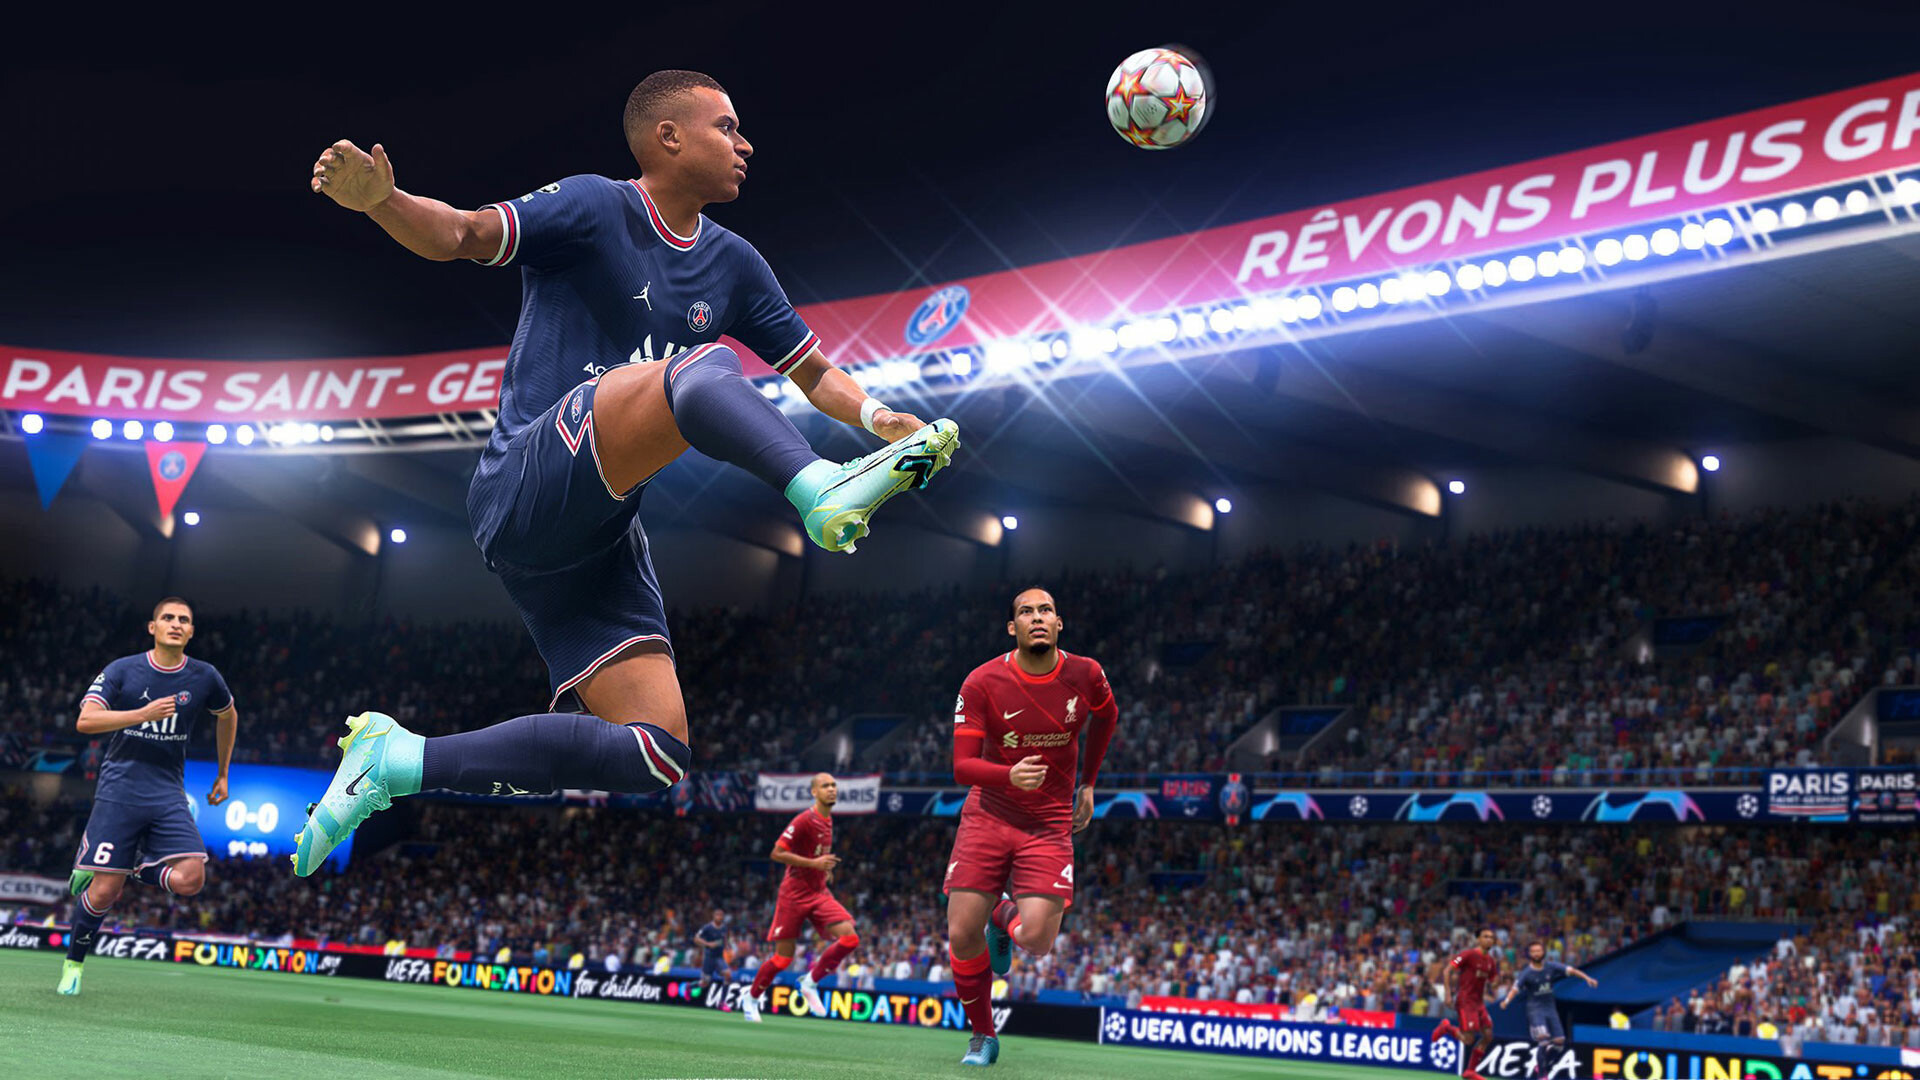 FIFA: A football simulation video game published by Electronic Arts, The 29th installment. 1920x1080 Full HD Wallpaper.